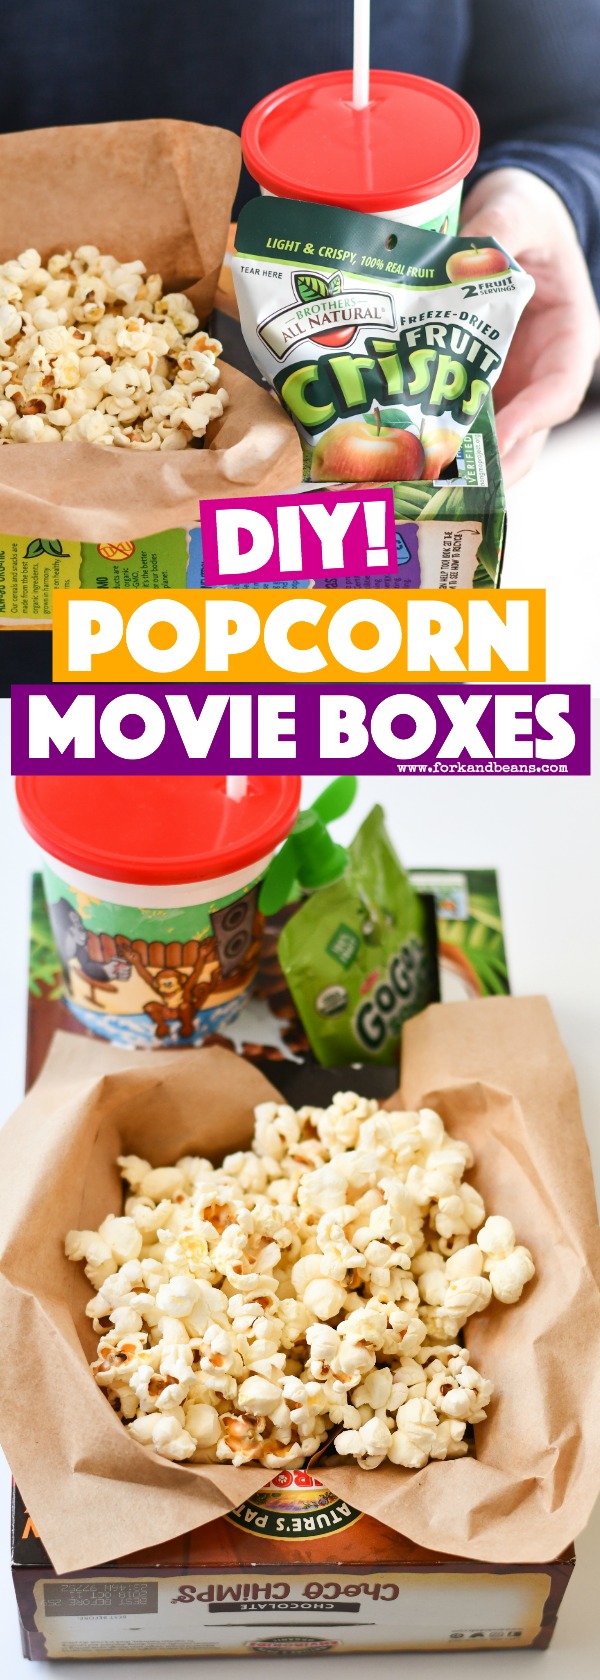 A cereal box turned into a popcorn container with a cup and snack holder